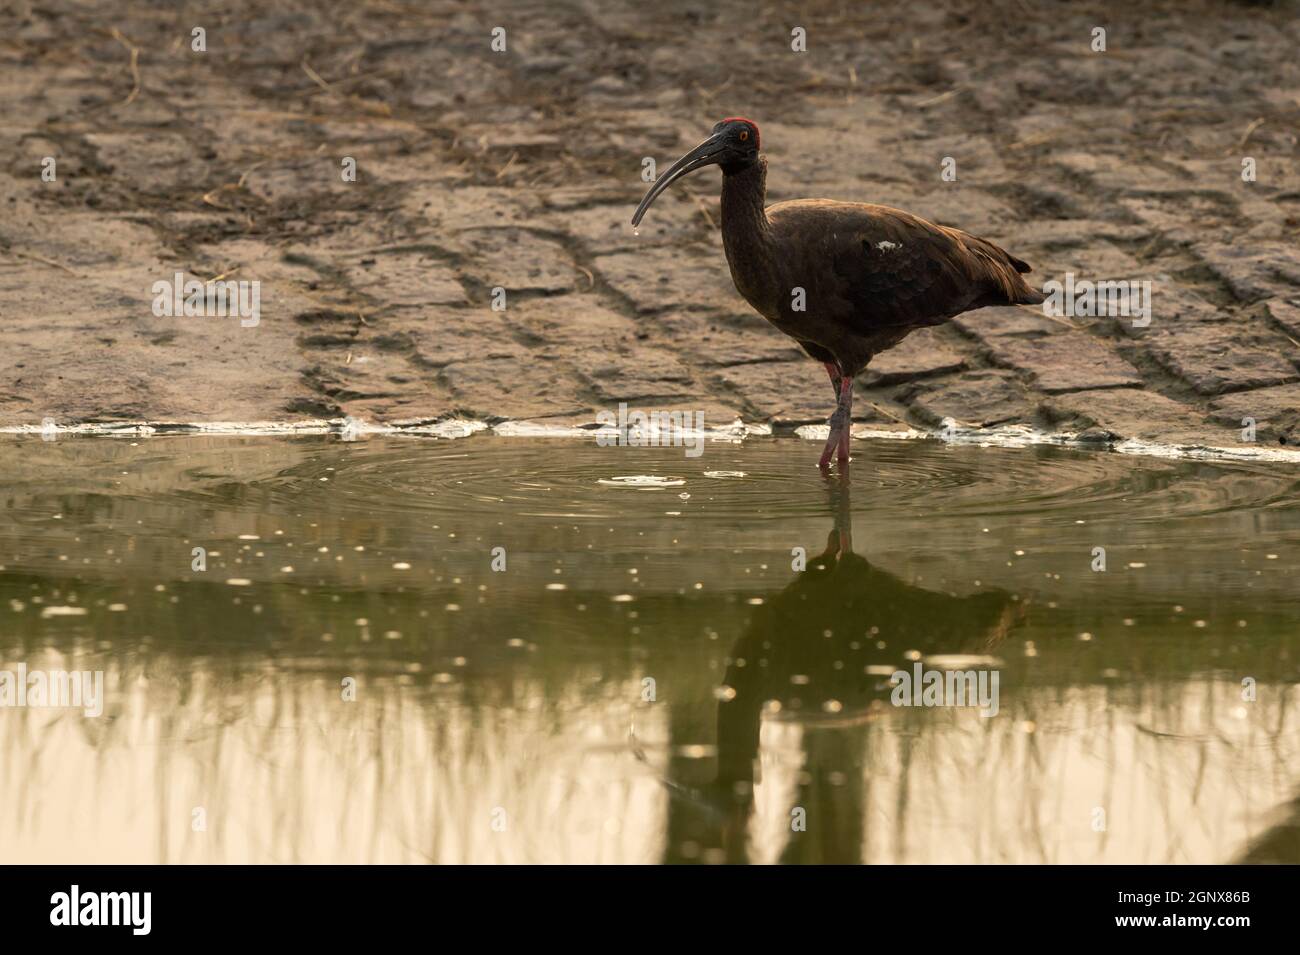 Red naped ibis or Indian black ibis or Pseudibis papillosa closeup with reflection in water at tal chhapar sanctuary rajasthan india Stock Photo